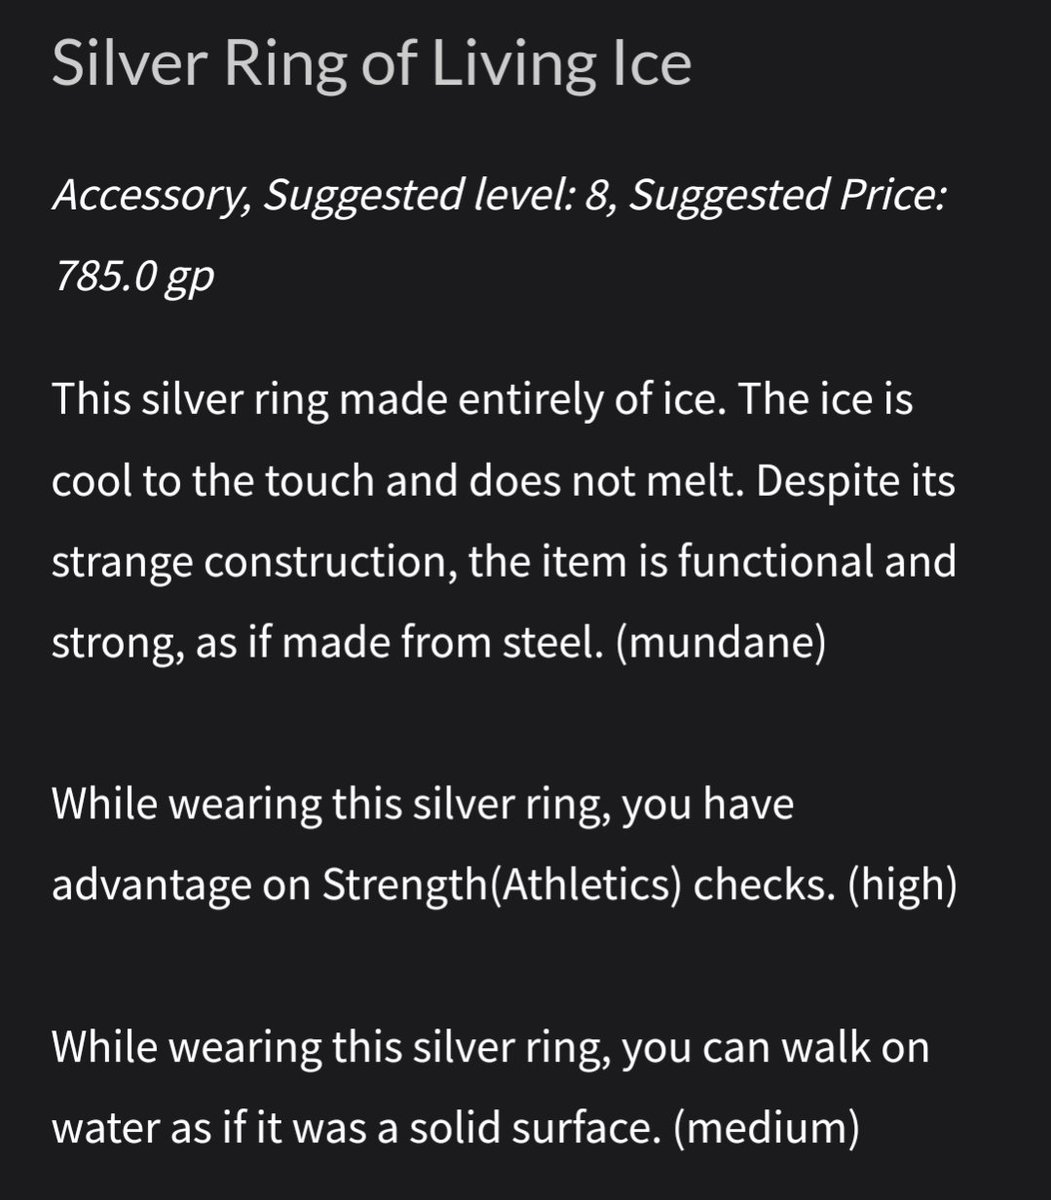 Random magic item of the day: Ring of Living Ice! You can generate millions of items like this for #DnD and other #TTRPGs over at ilootthebody.com